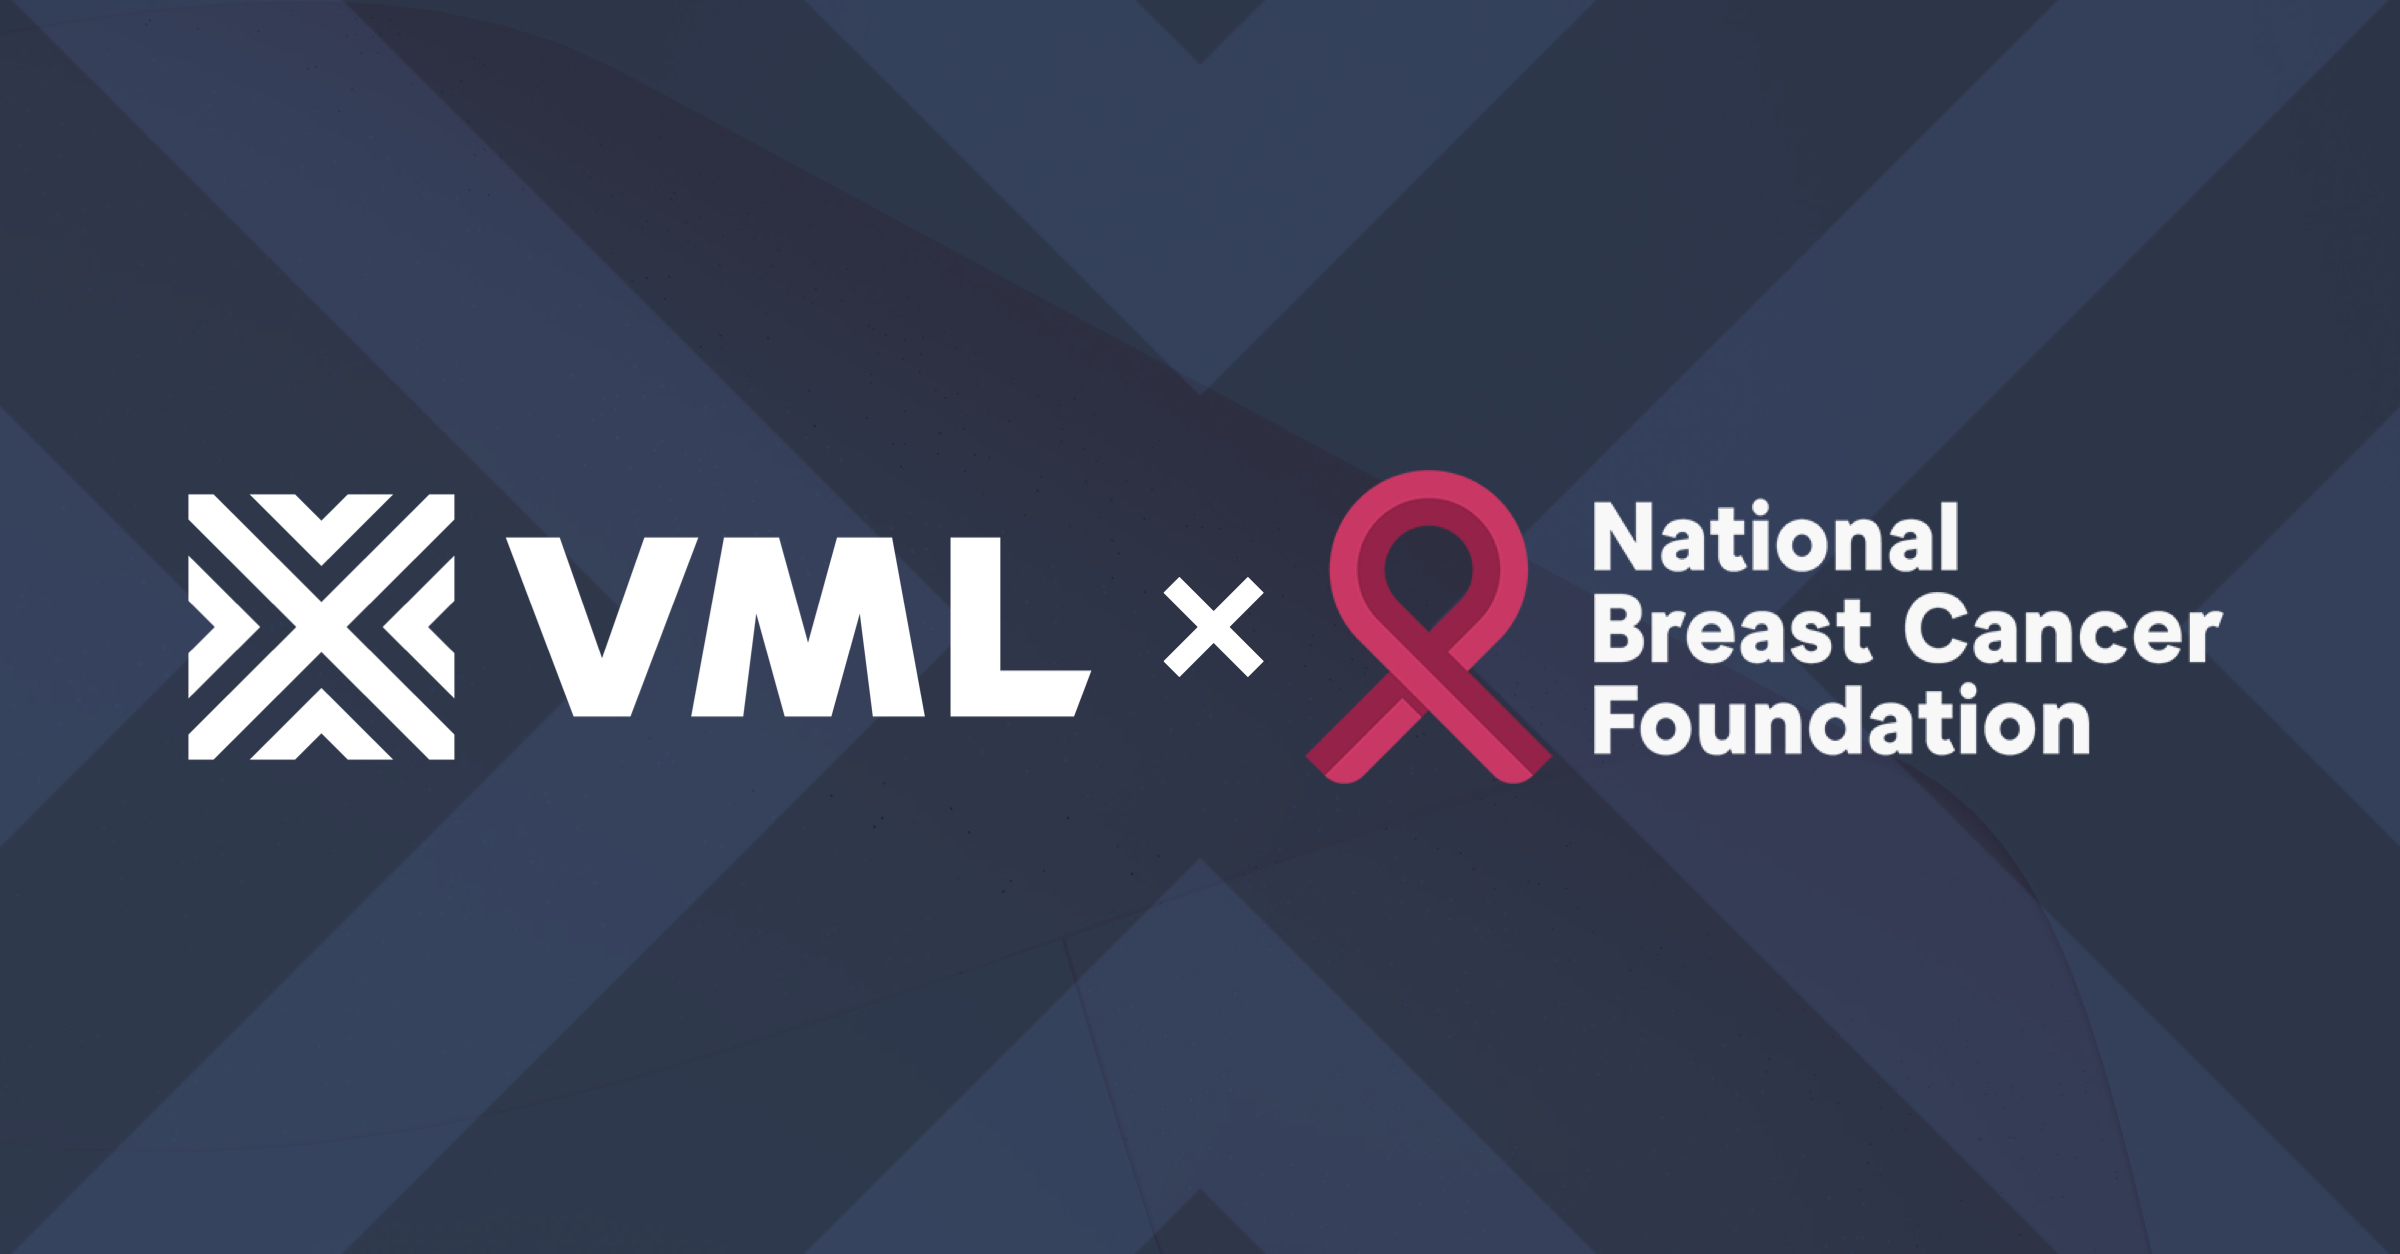 VML and the National Breast Cancer Foundation’s fresh partnership set to be ‘a powerful combination’